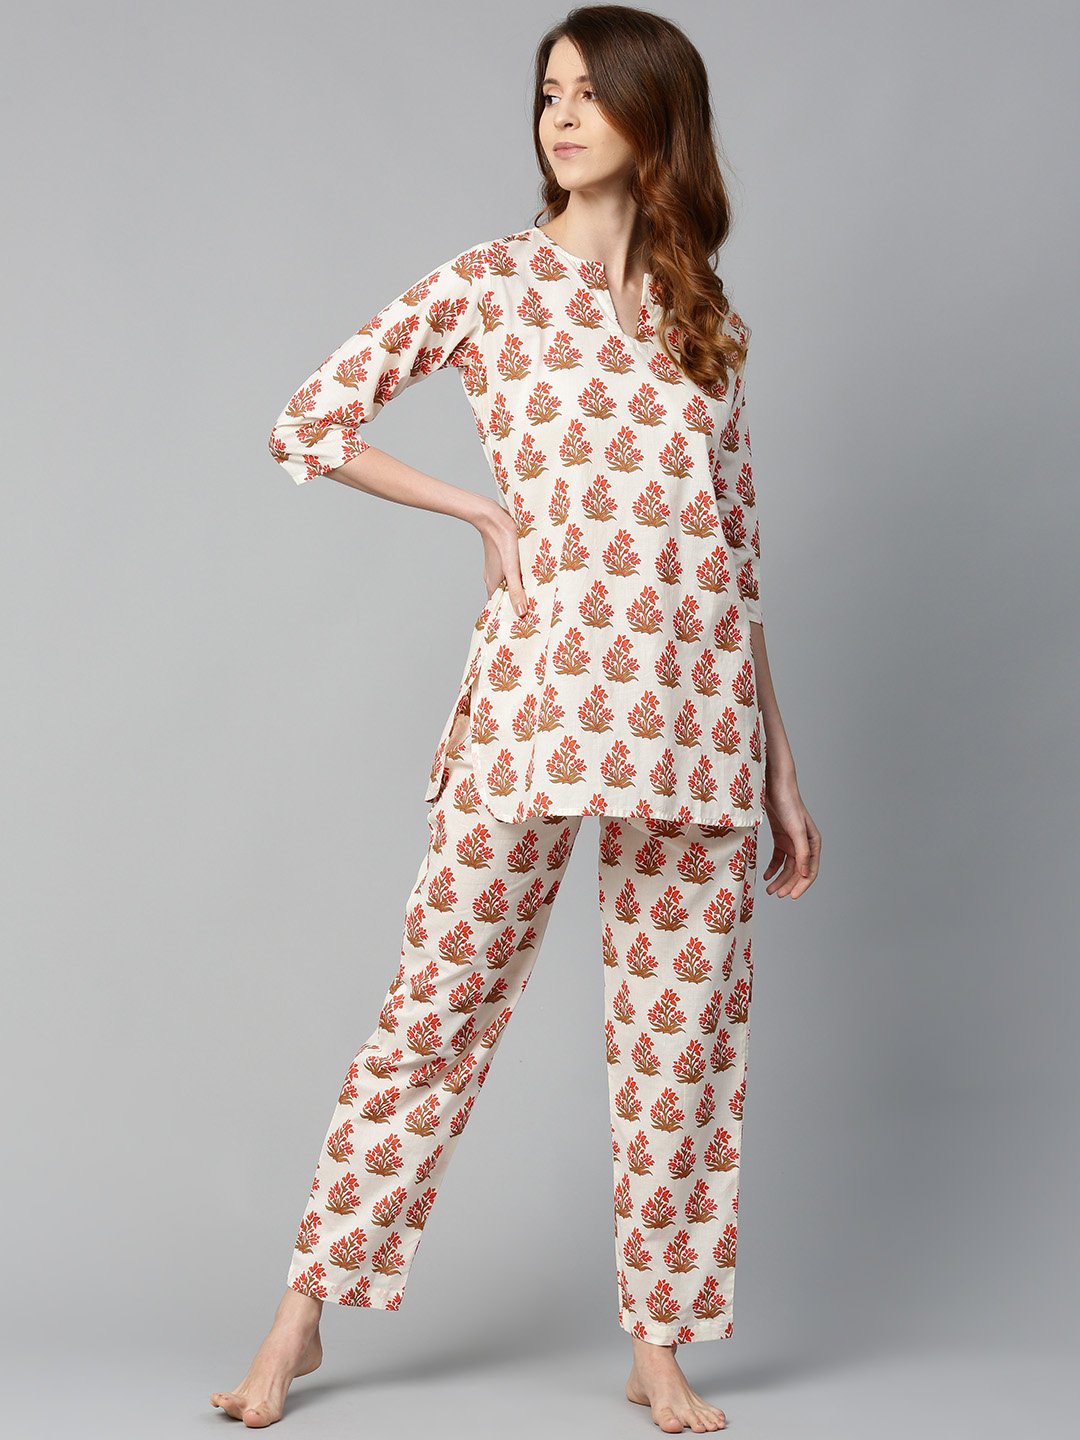 Women's White And Multi Floral Prnt Top And Pant Set - Nayo Clothing